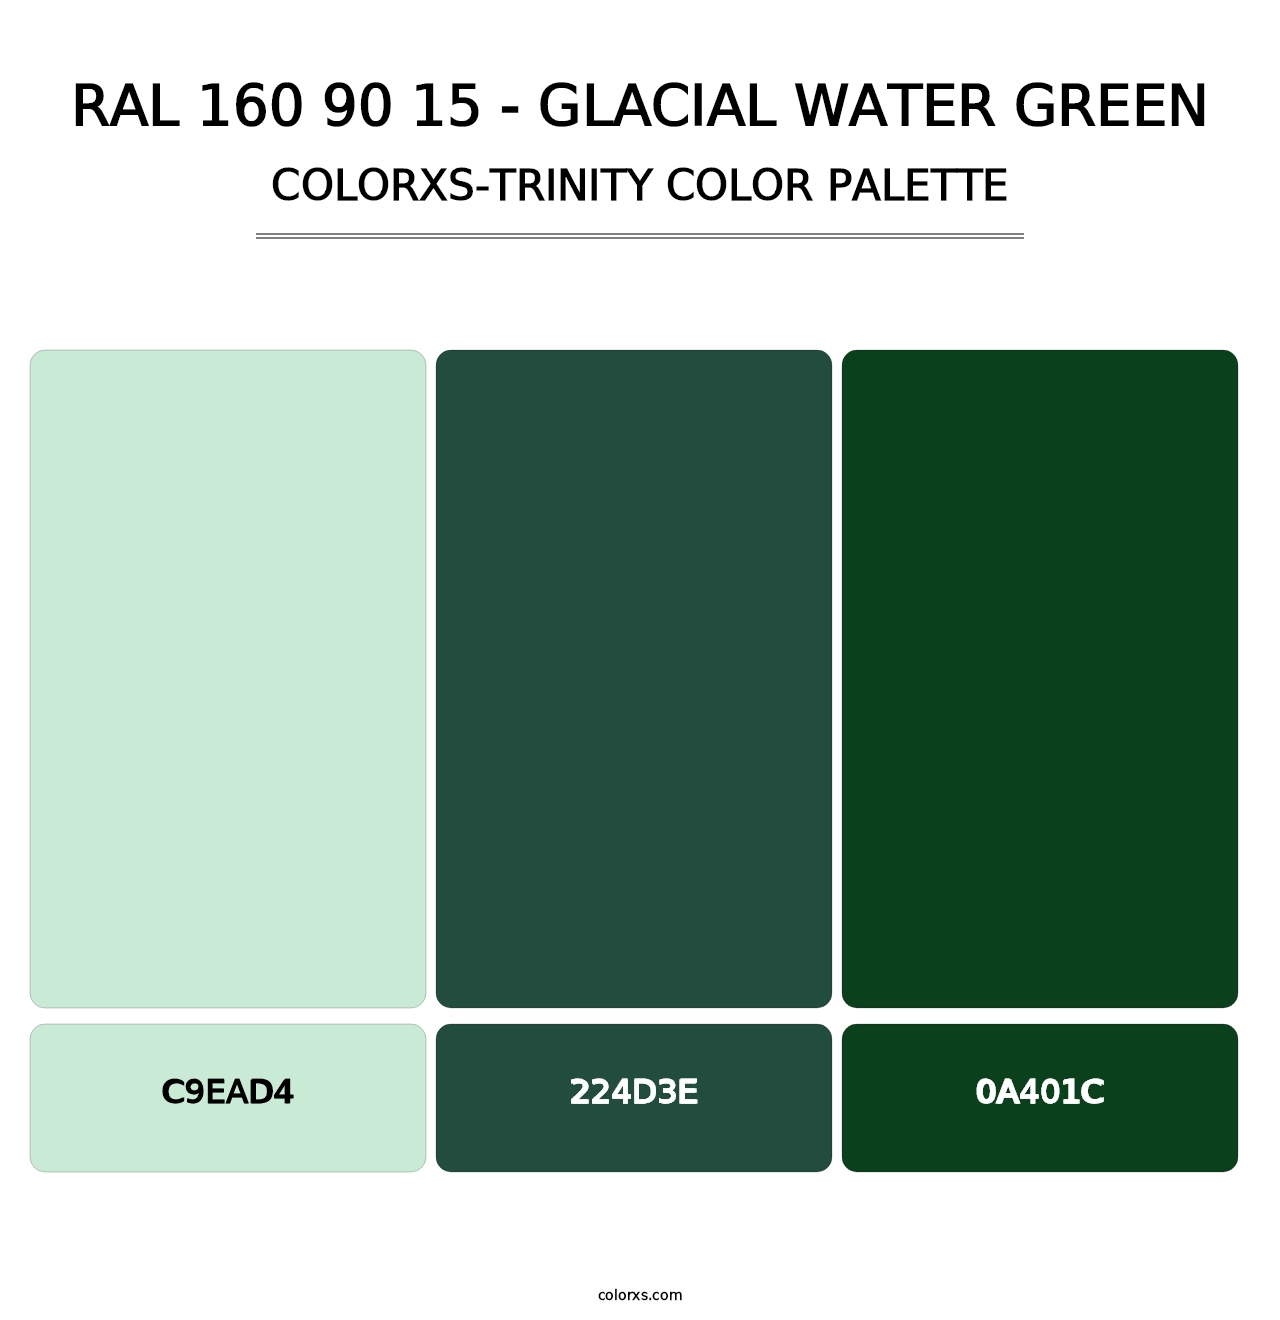 RAL 160 90 15 - Glacial Water Green - Colorxs Trinity Palette